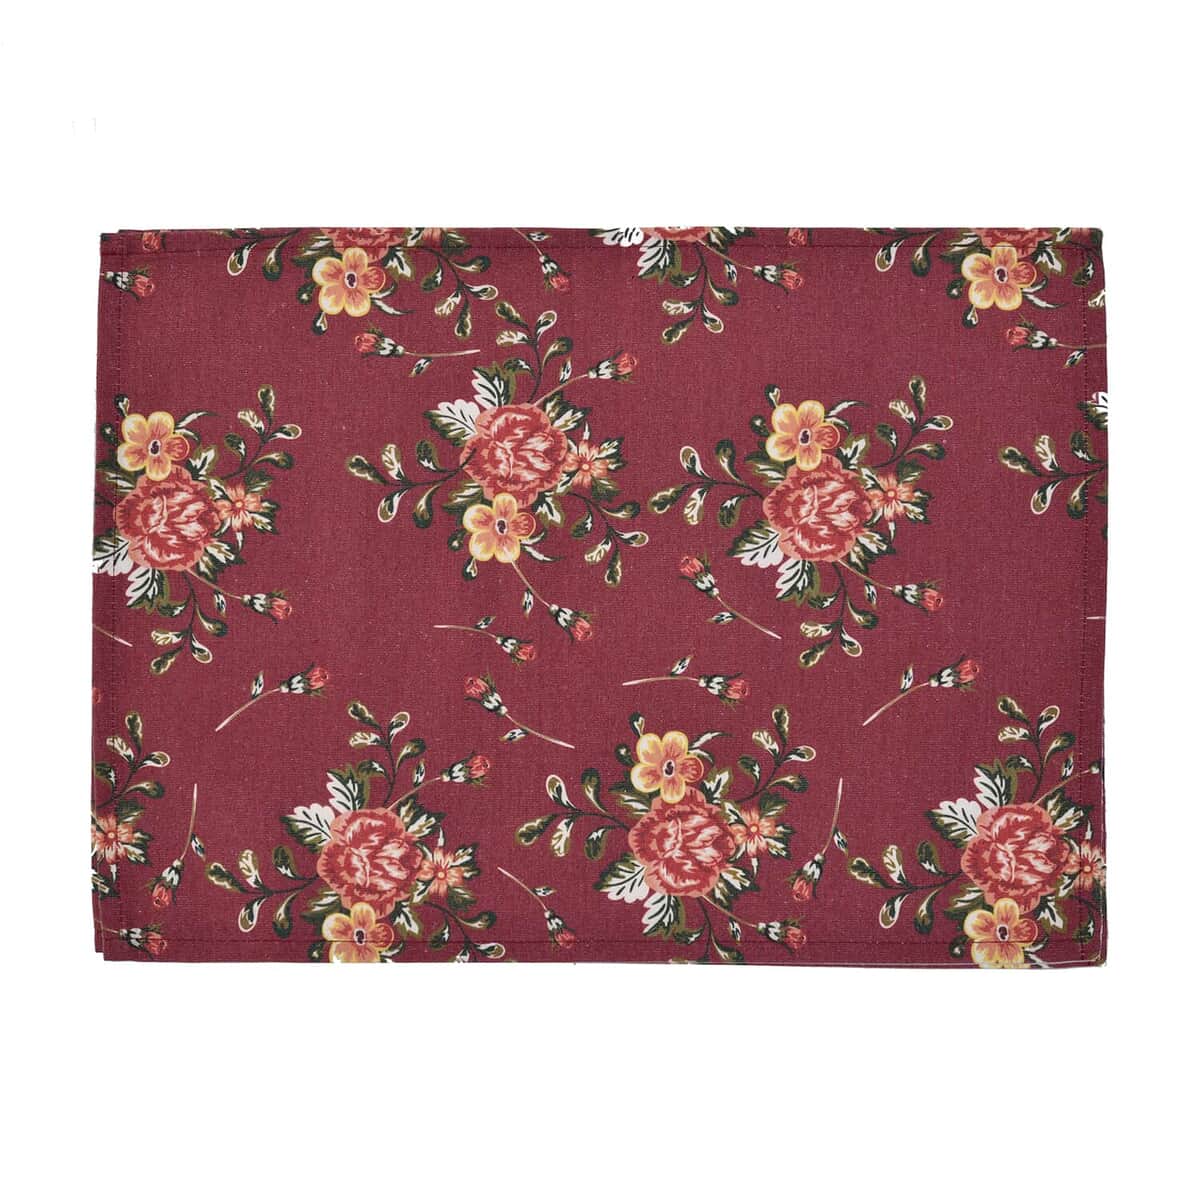 Homesmart Set of 4 Placemats and Table Runner For 4 Seater Dinning Table, 4 Washable Wrinkle Resistant Placemats  and Table Runner - Elegant Floral Pattern image number 3